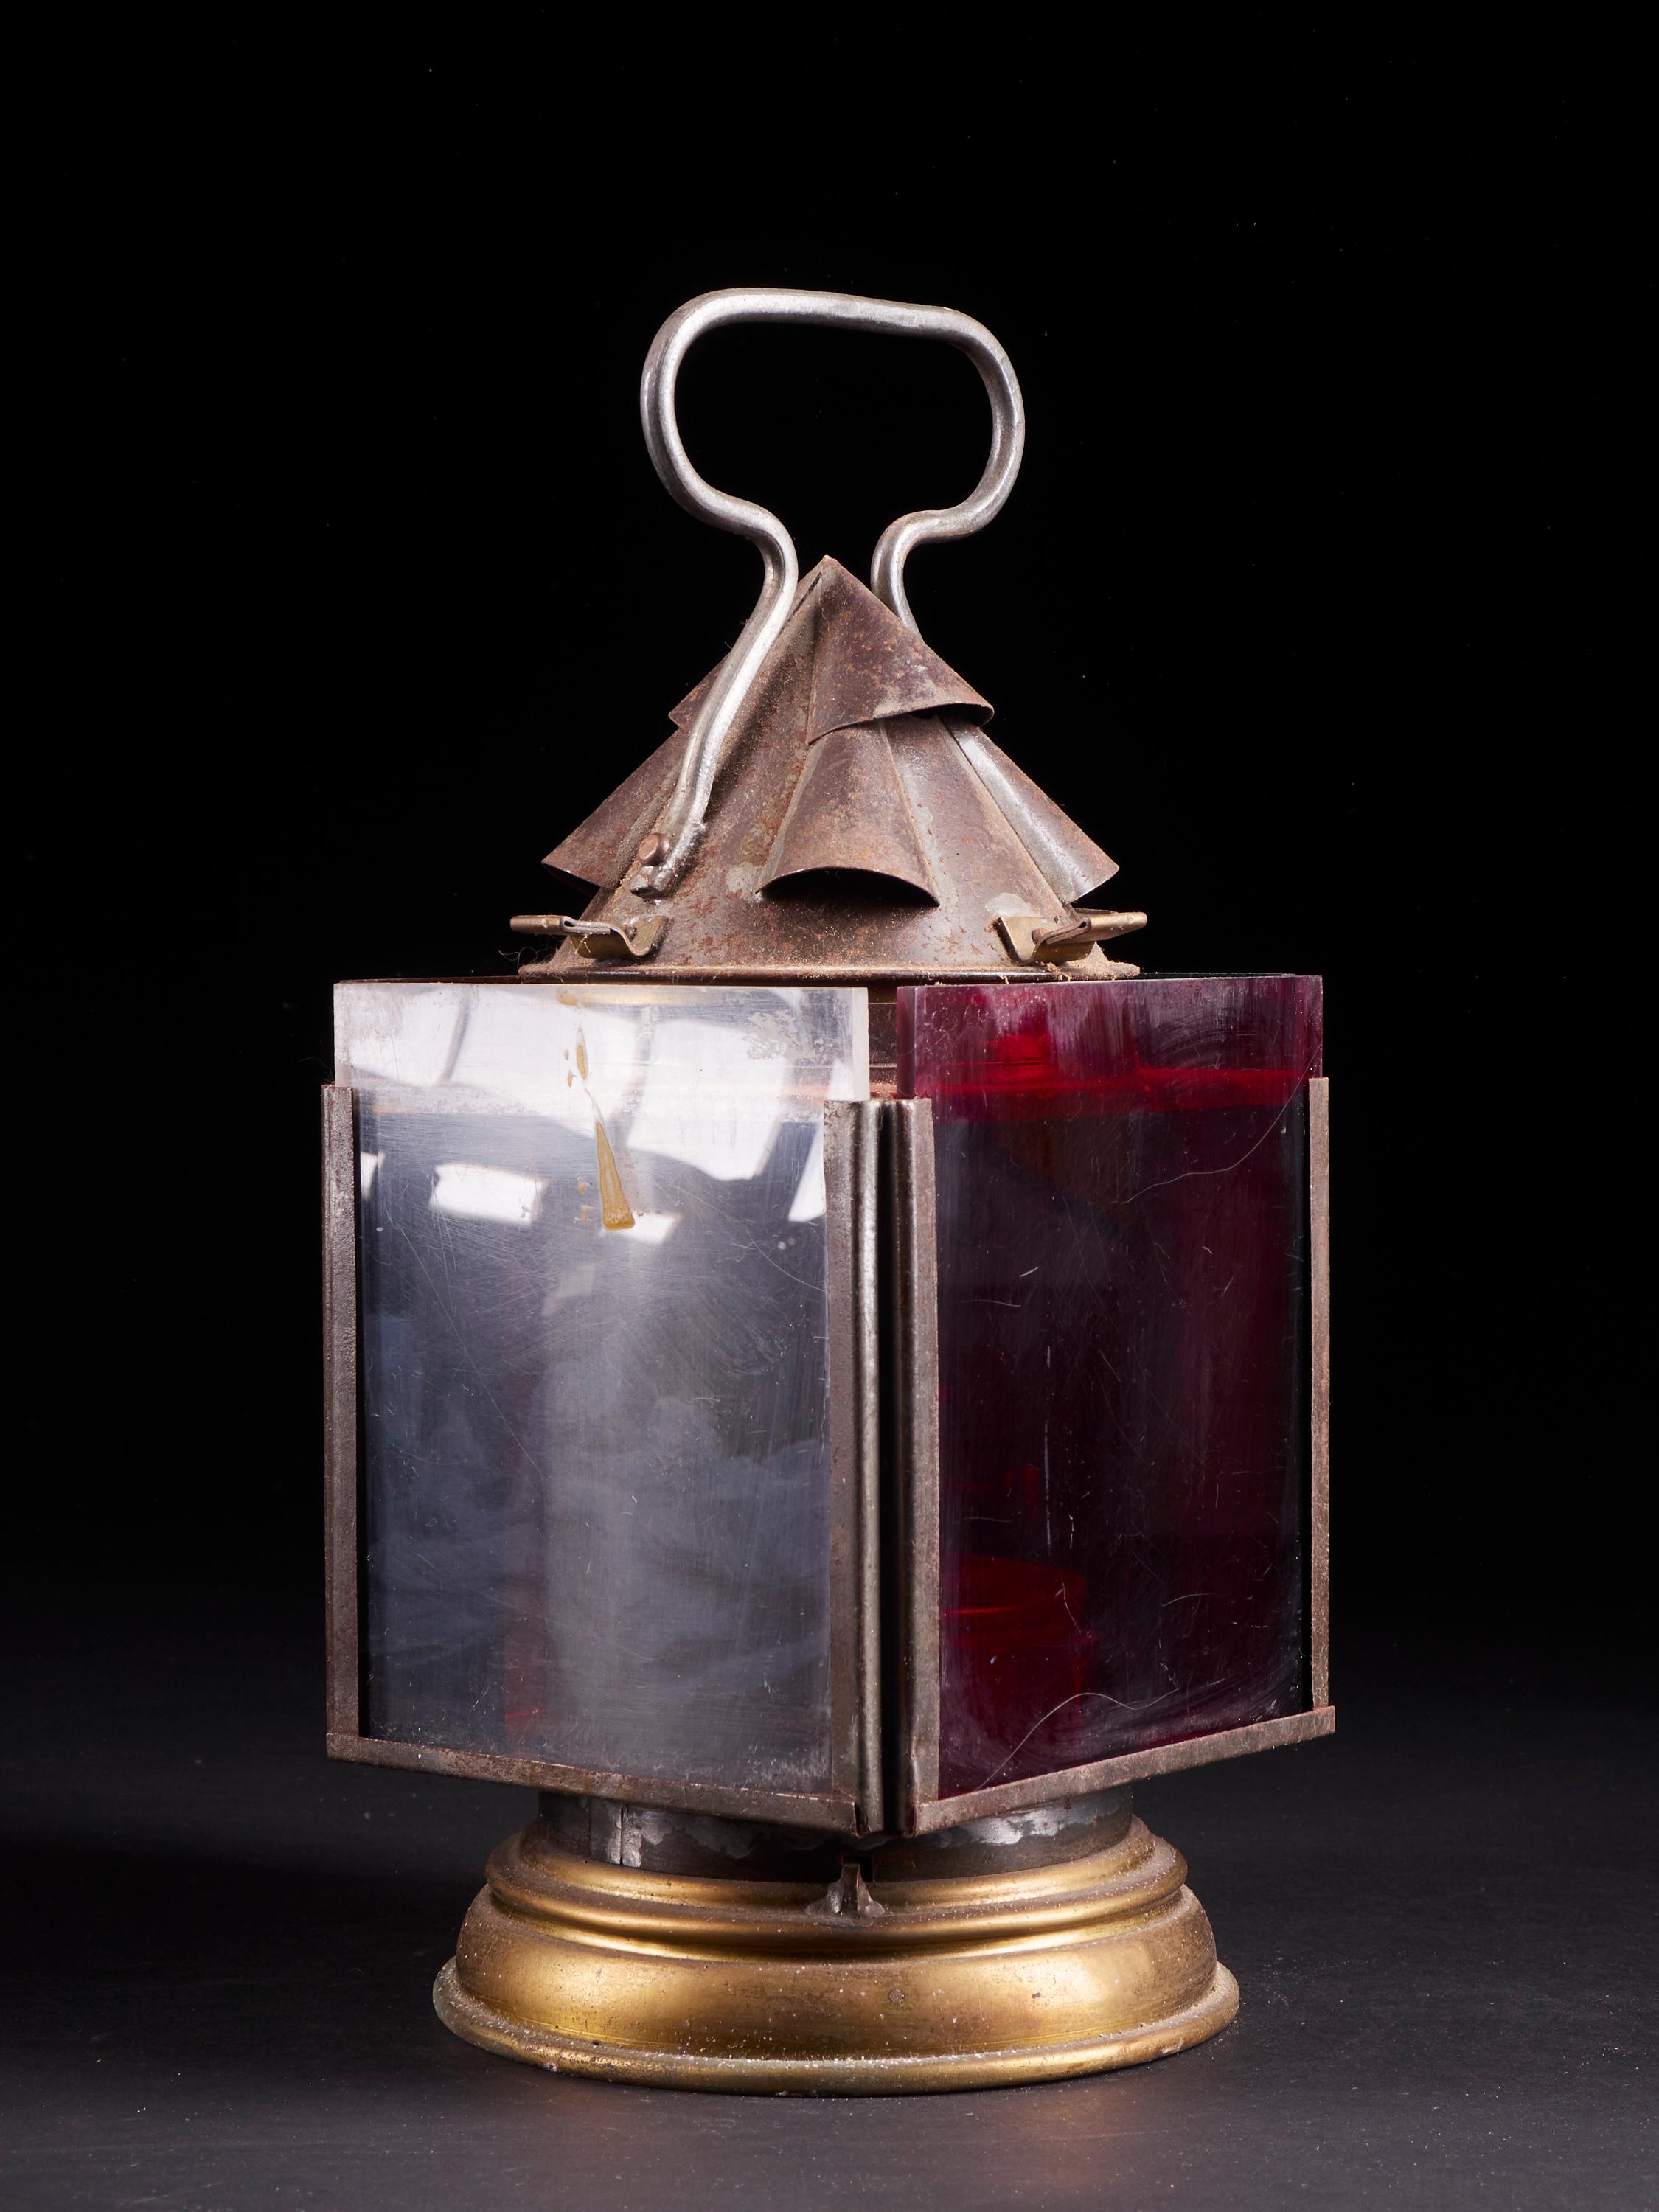 Lovely small vintage square signal oil lantern featuring four orange, blue, red and white tinted glass panels. The lantern has a round brass base and a handle at the top.